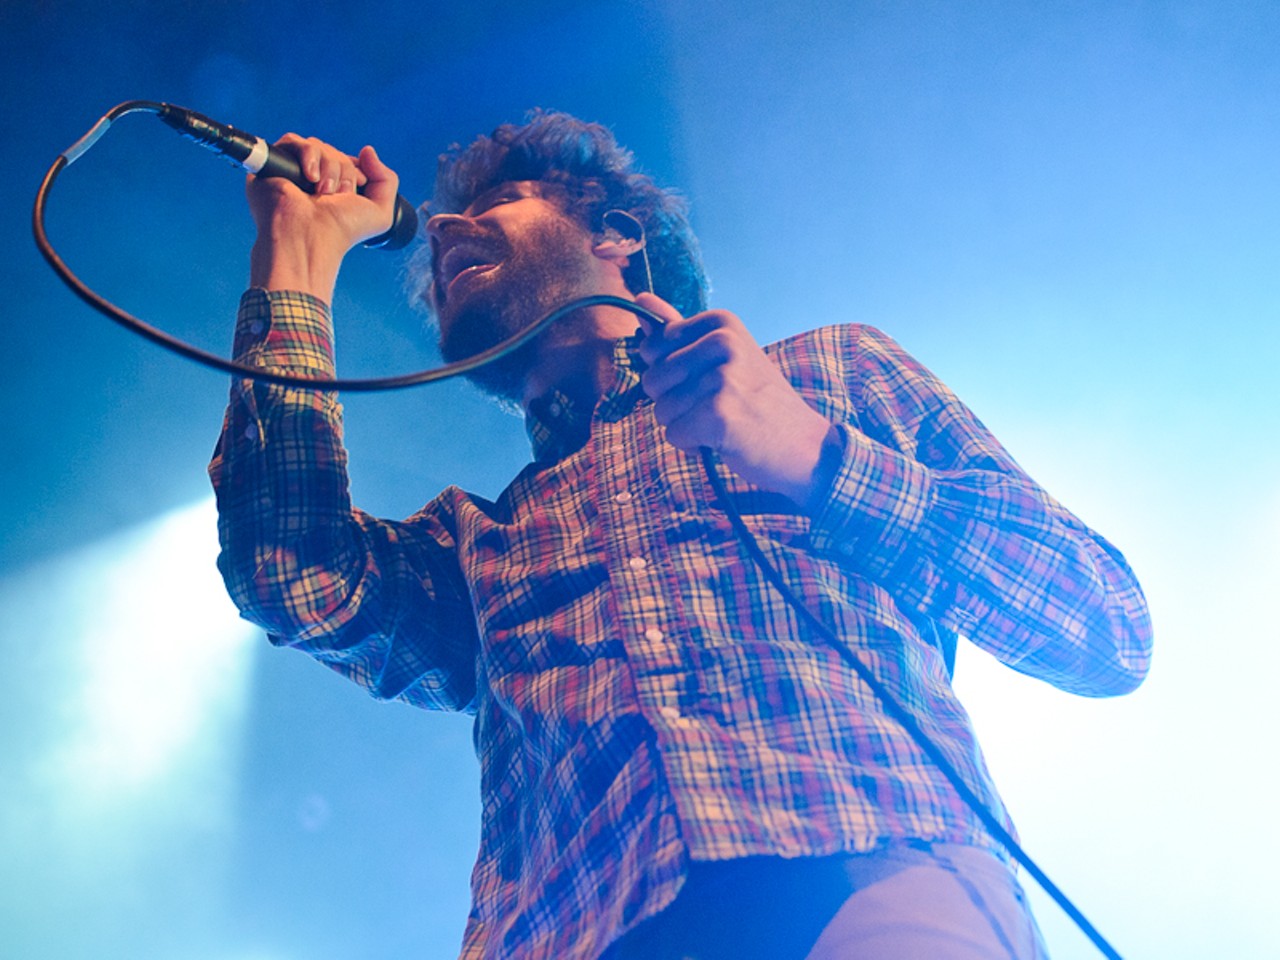 Passion Pit performing at The Pageant.